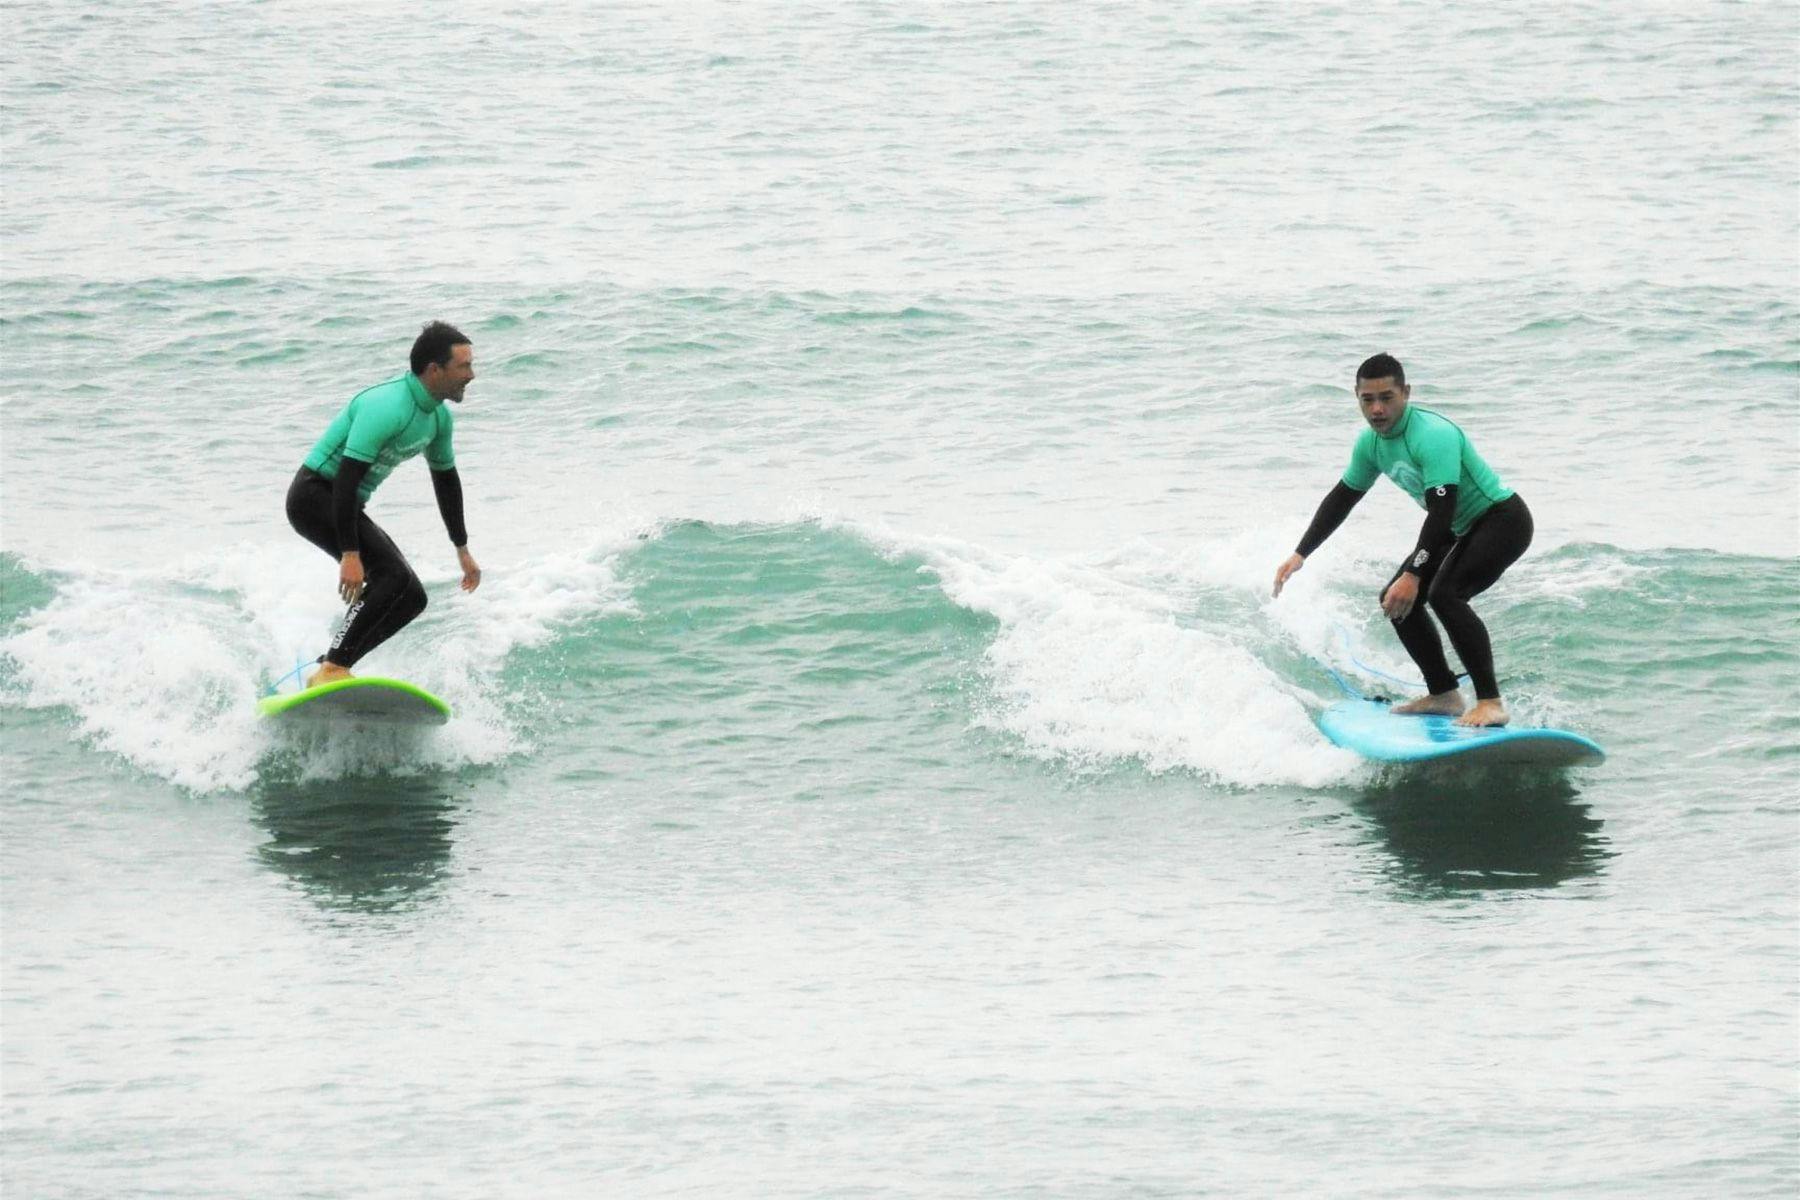 a surf lesson and surf therapy session in aotearoa new zealand